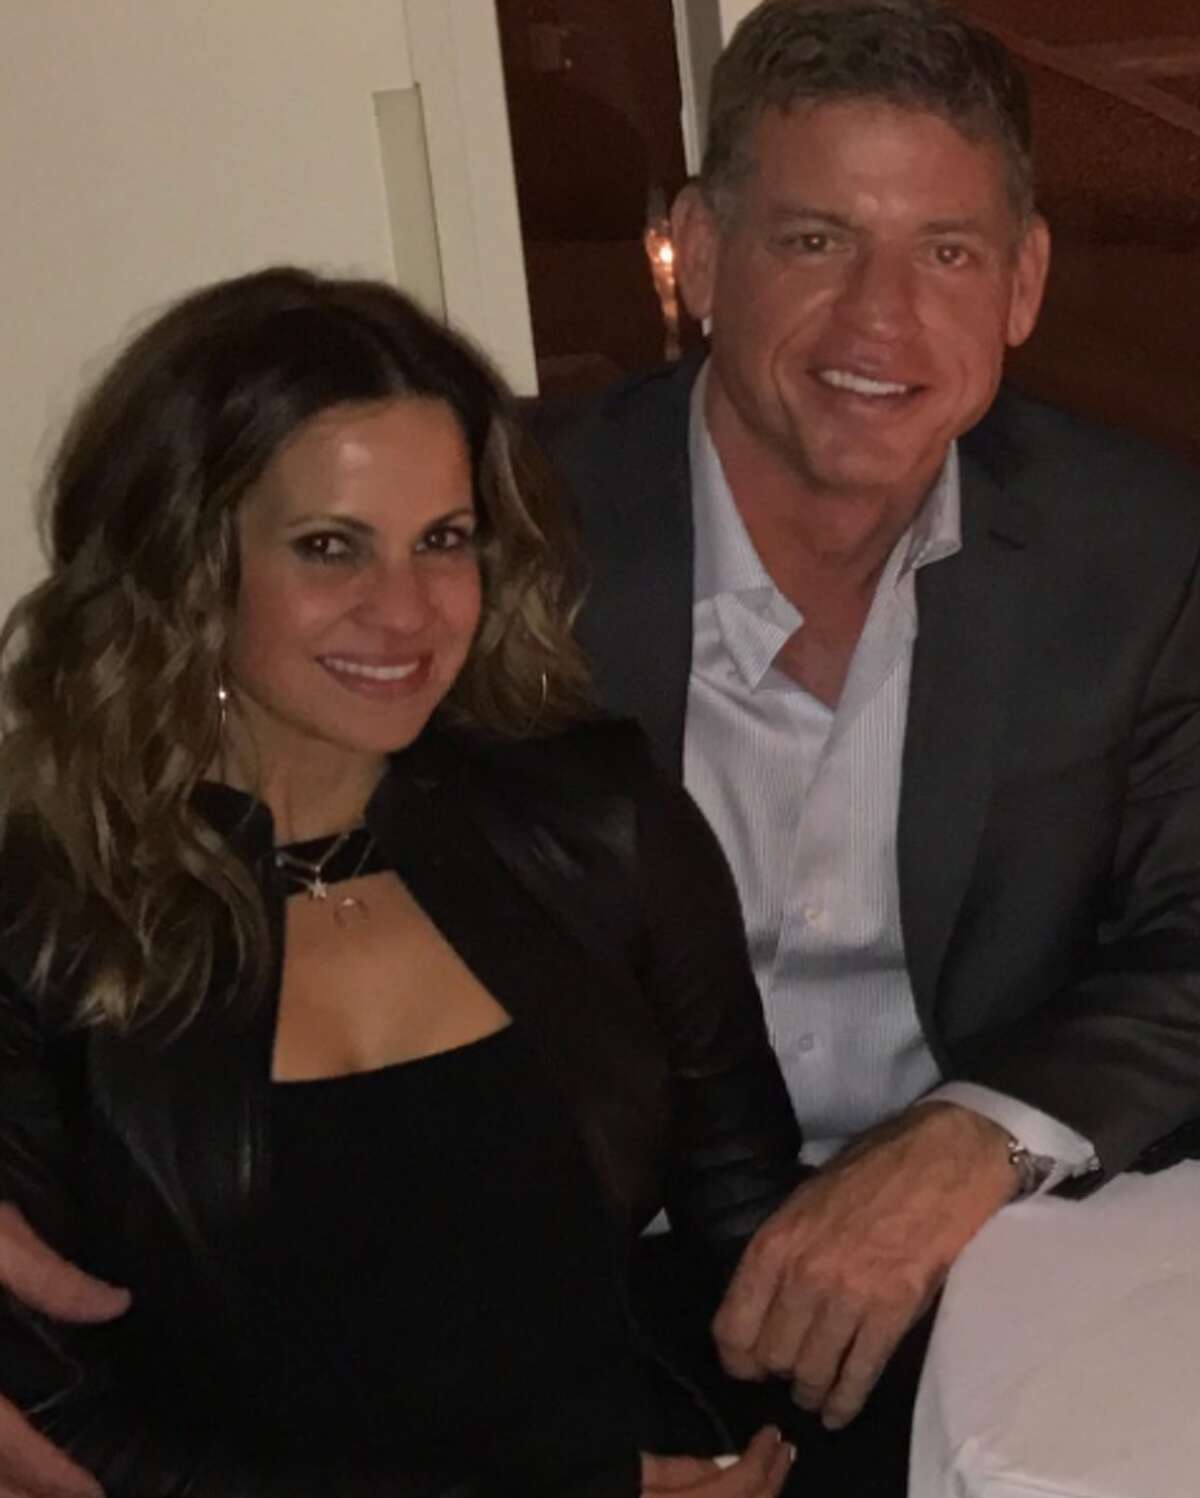 Hall of Fame quarterback Troy Aikman gets engaged